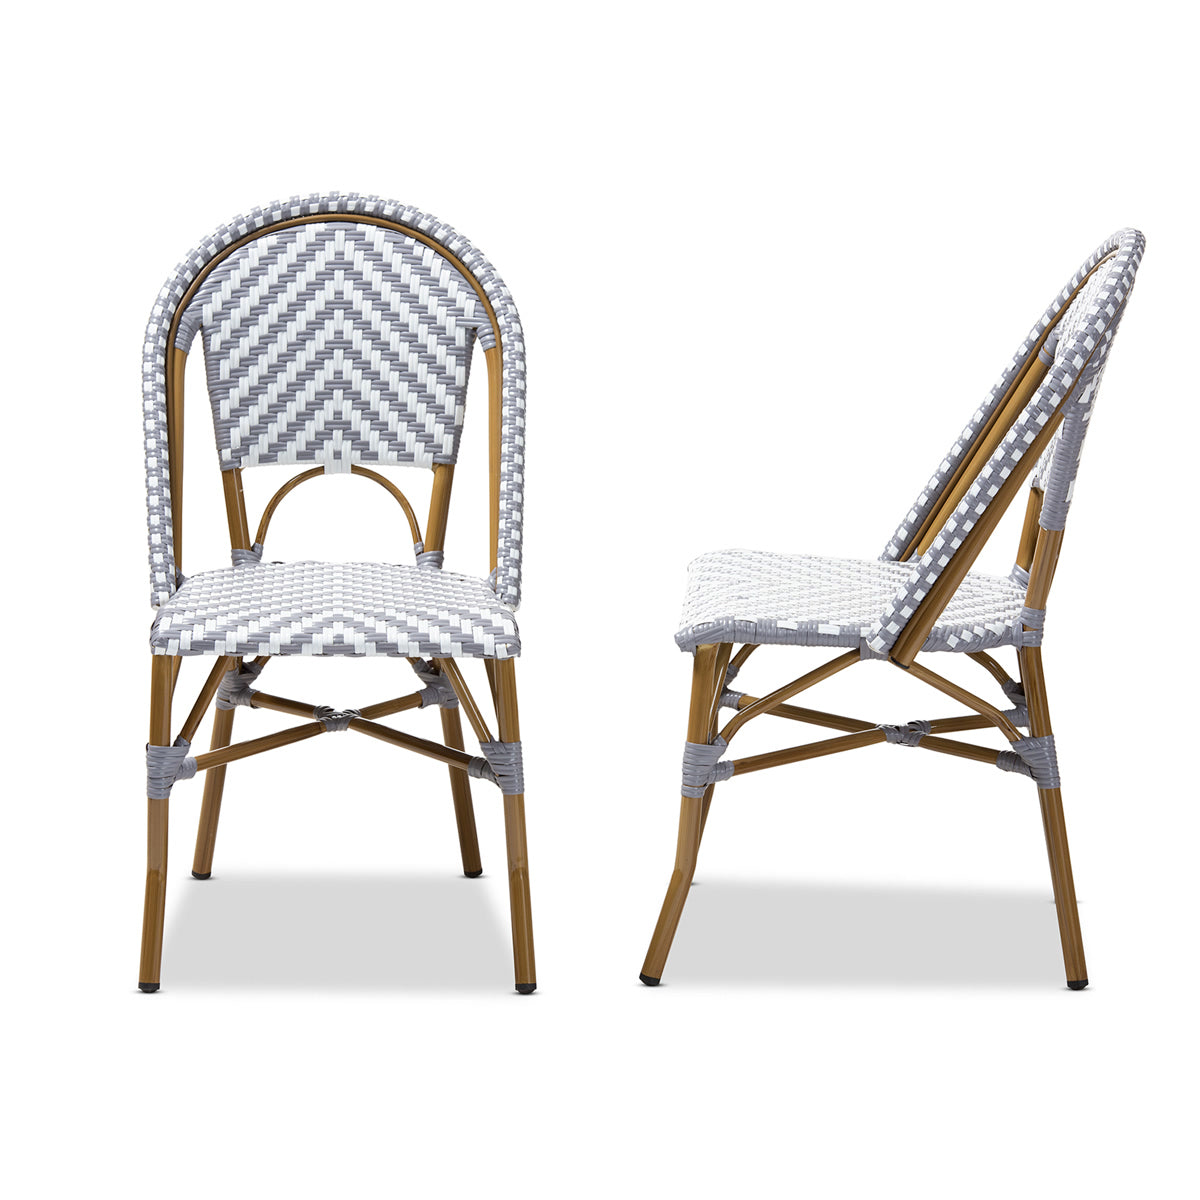 Baxton Studio Celie Classic French Indoor and Outdoor Grey and White Bamboo Style Stackable Bistro Dining Chair Set of 2 Baxton Studio-dining chair-Minimal And Modern - 3